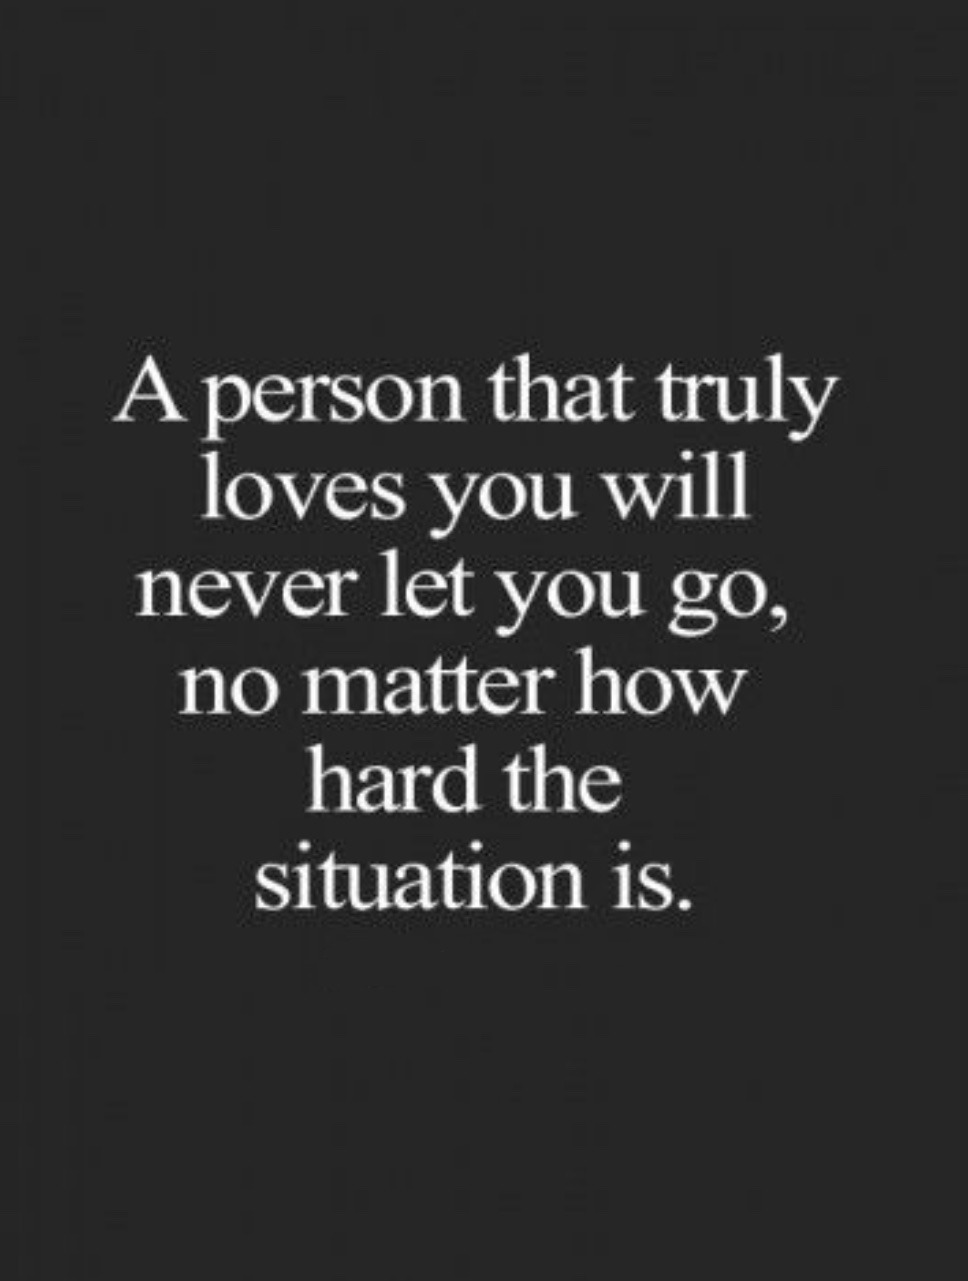 love fact love quotes never let you go no matter what hard situation love quotes ugly